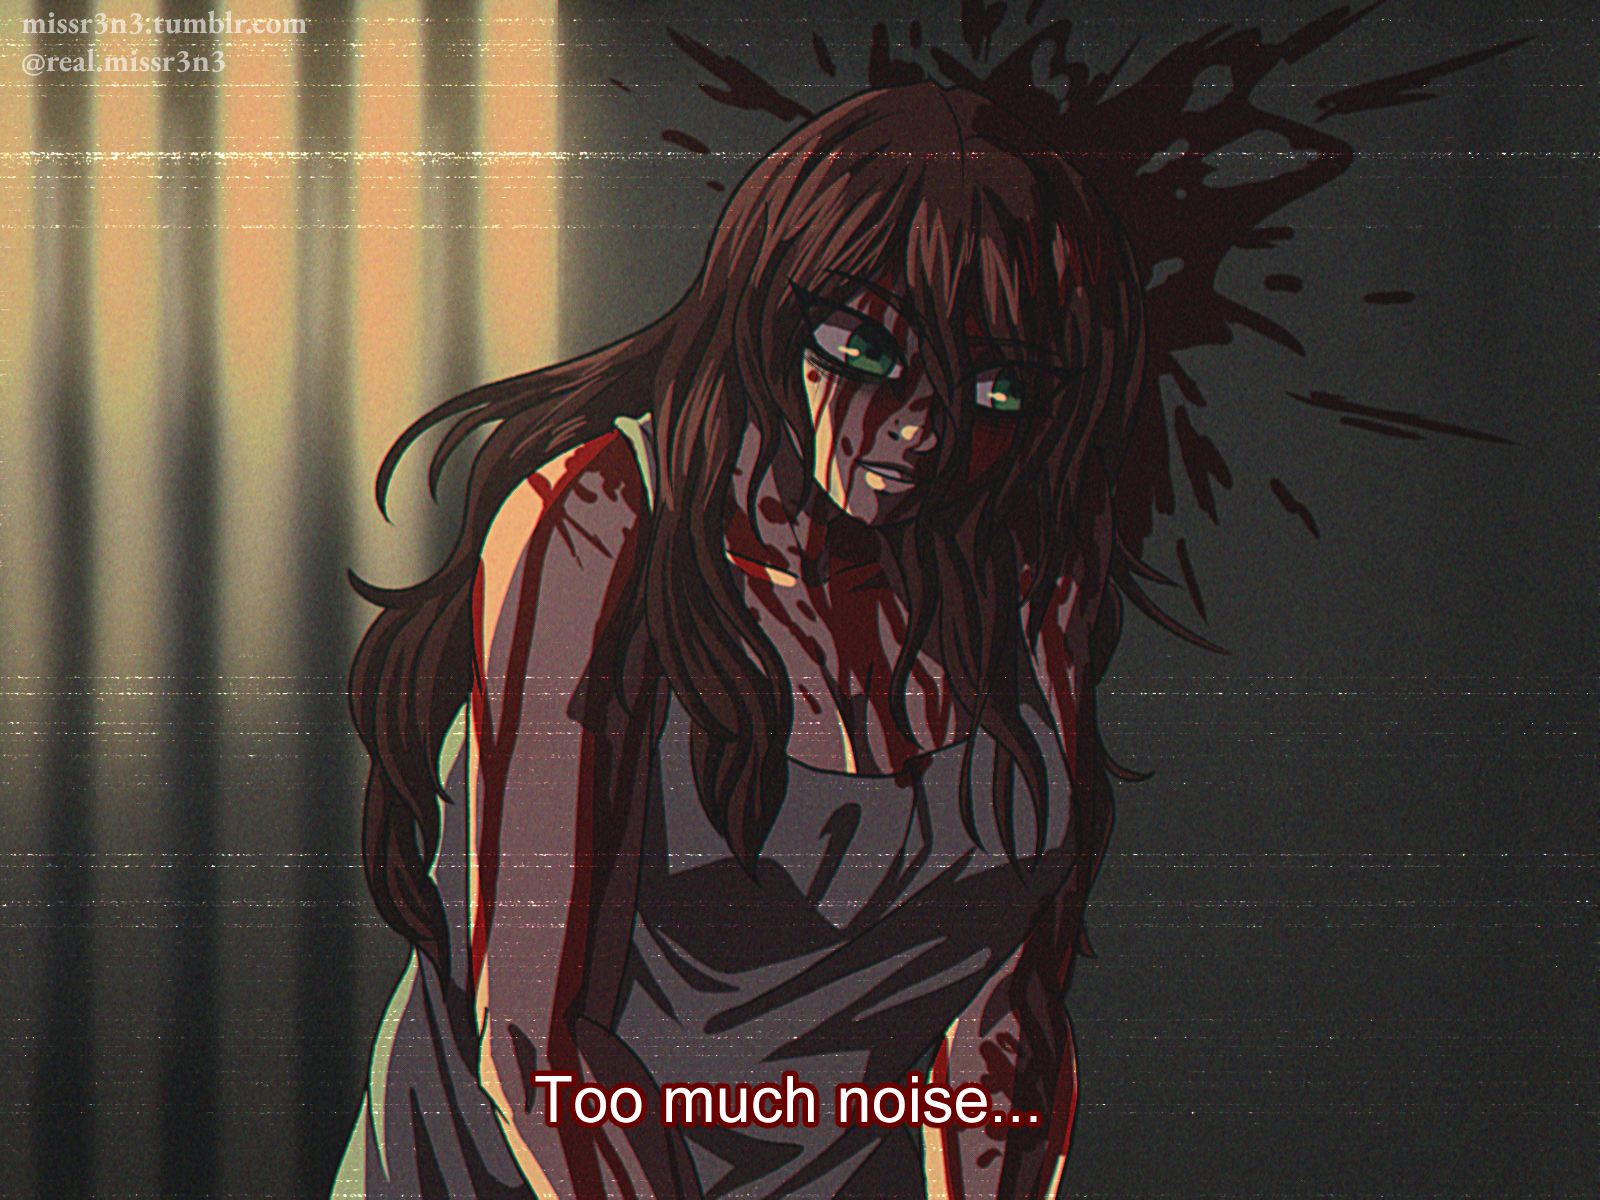 a fake anime screenshot of vanessa from the cabin tales christmas special after she bashed her head against the wall. text in the style of fansubs reads 'too much noise...'